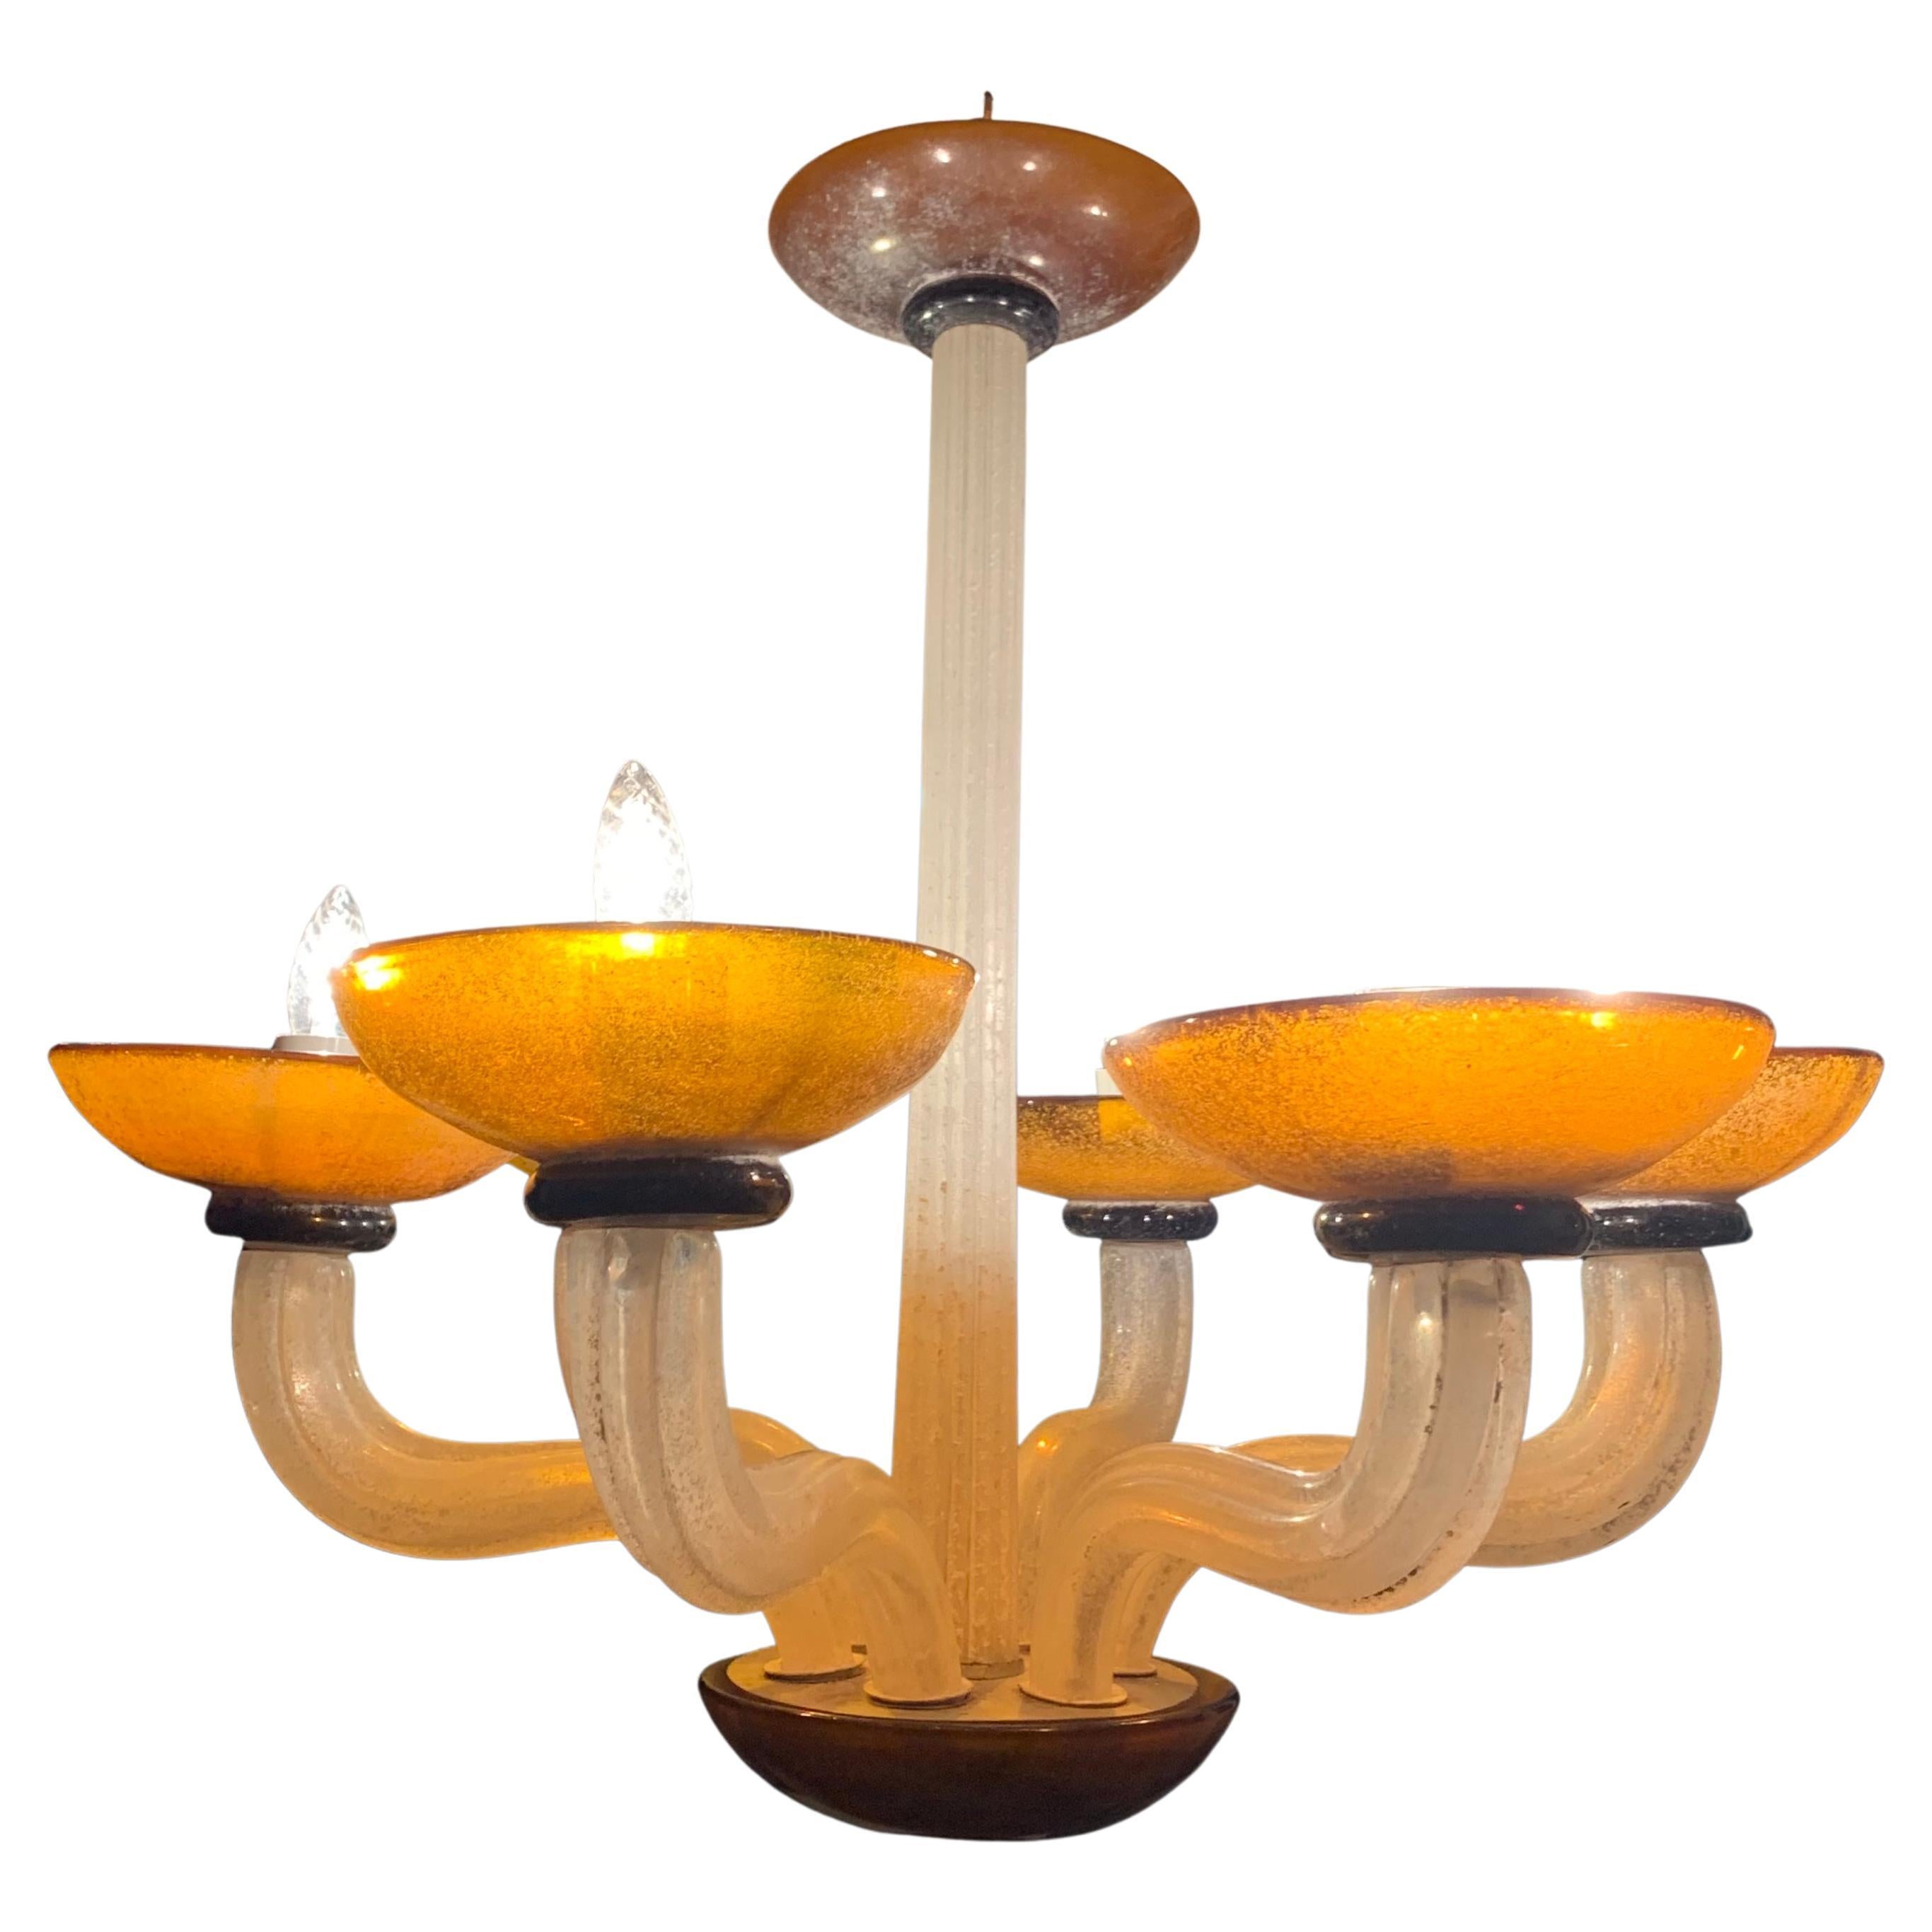 Karl Springer Seguso fluted cream and amber scavo murano glass chandelier, 1980s.
 Murano glass design by Karl Springer, manufactured by Seguso Vetri d’Arte, Italy.
Neoclassical Revival Postmodernism of the early 1980s. Fluted columnar central axis